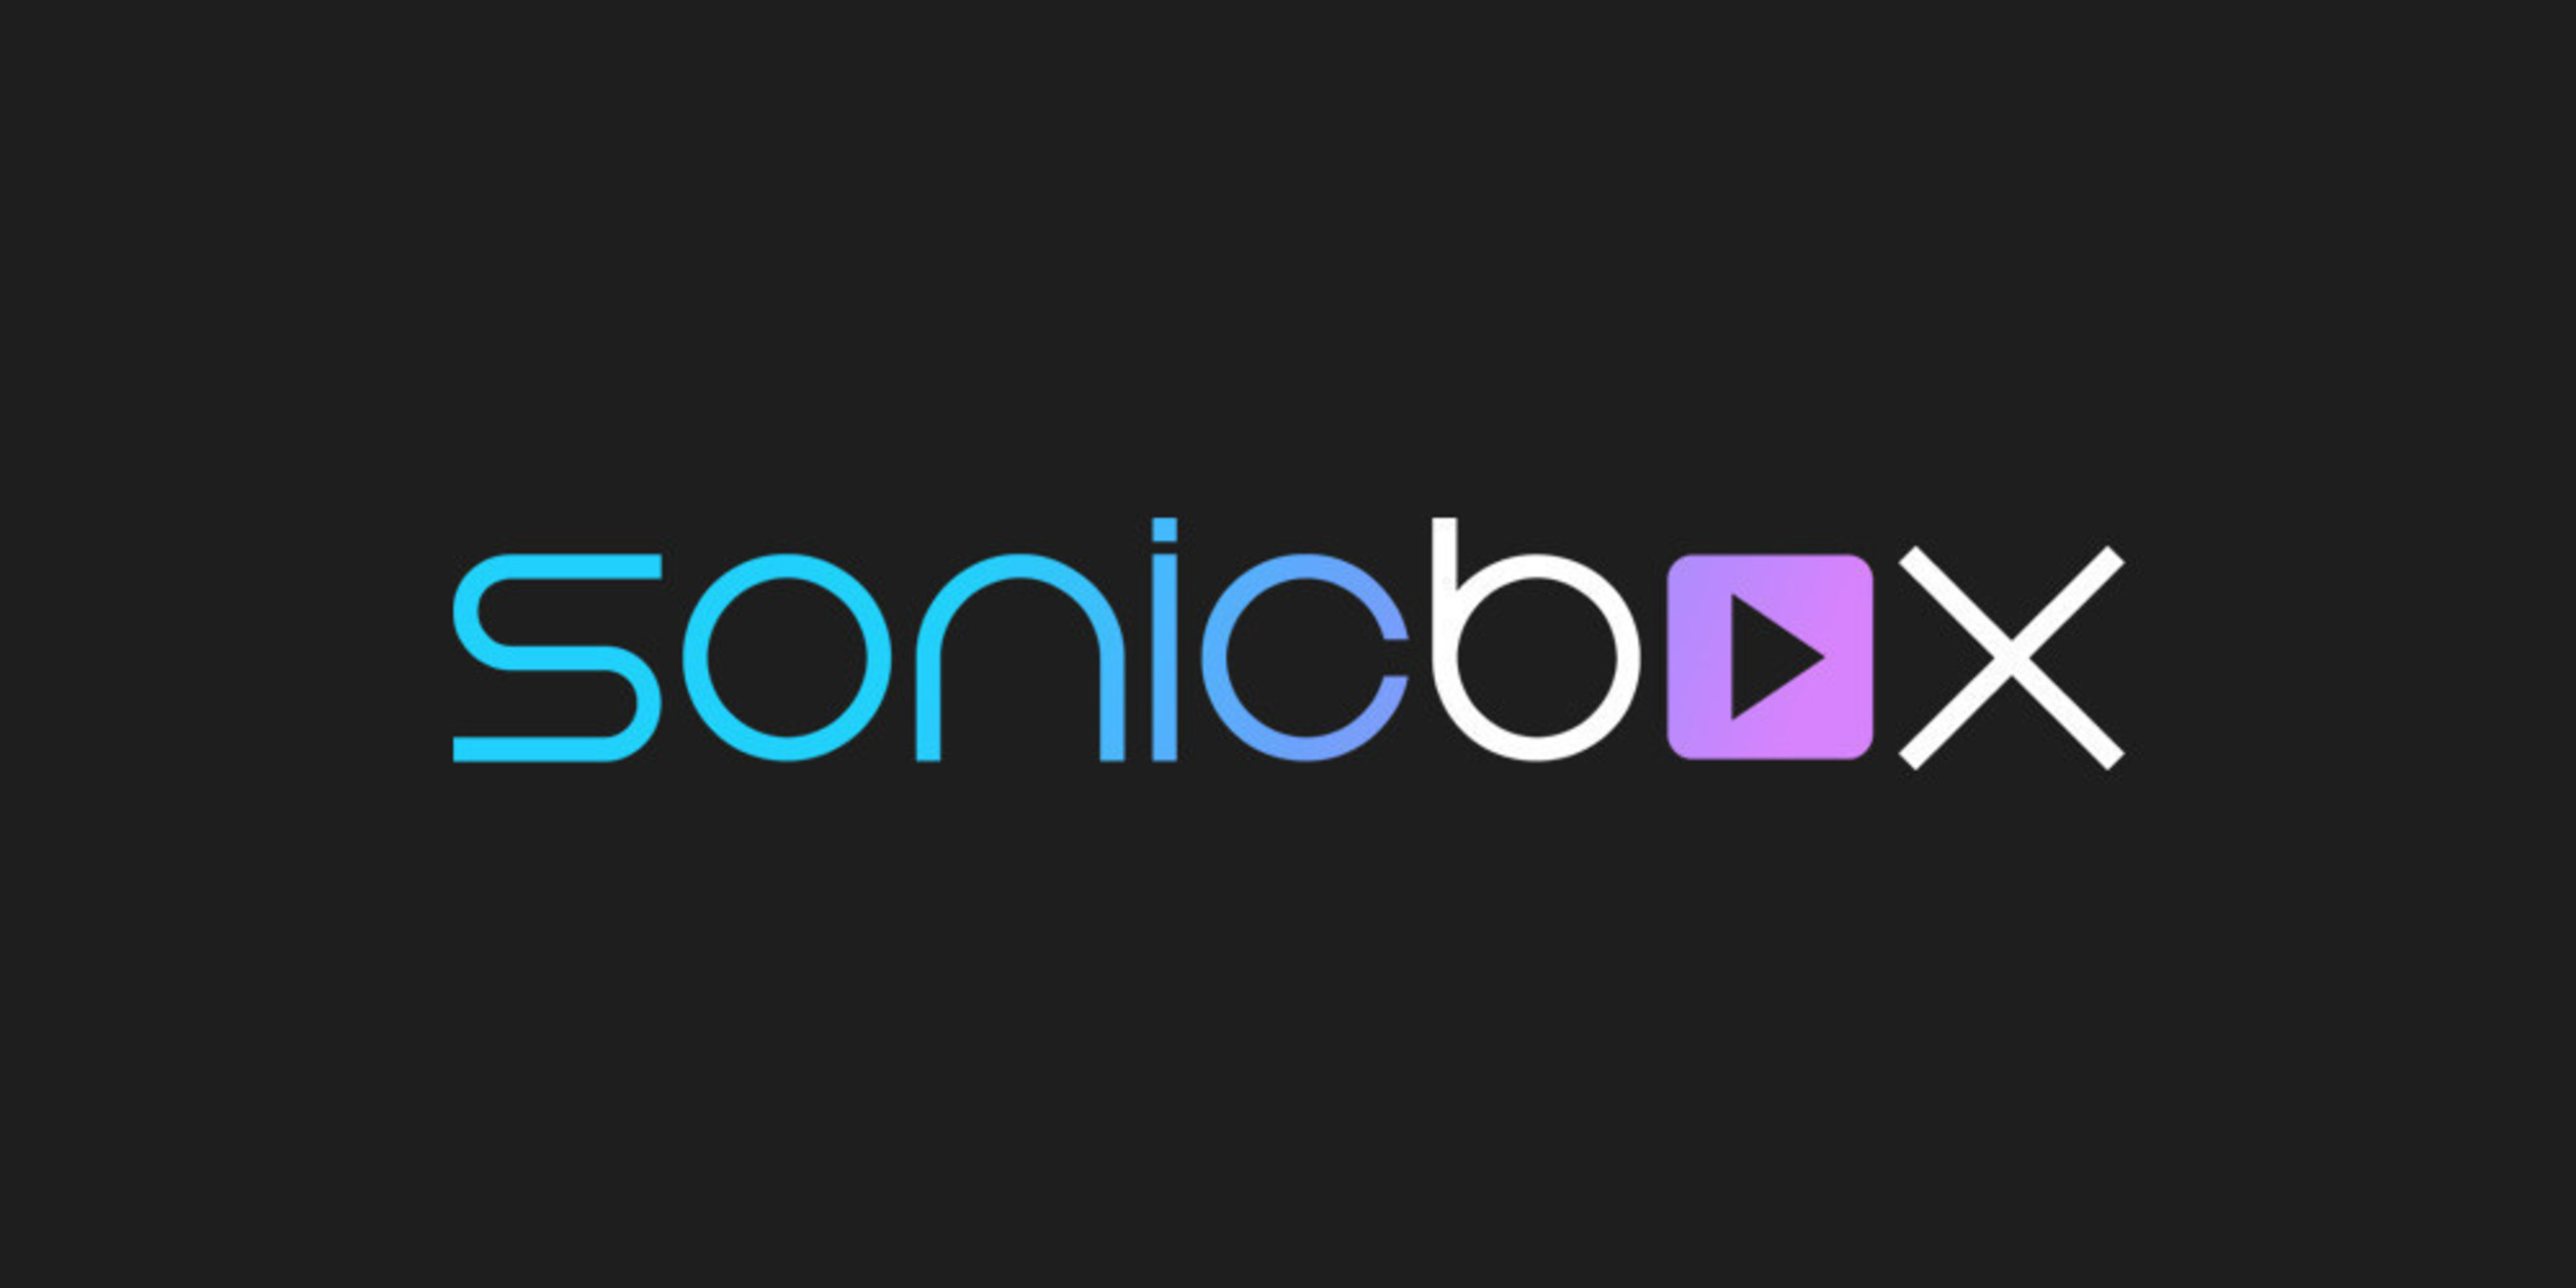 SONICBOX.COM is a free LIVE streaming video service for up and coming musicians.